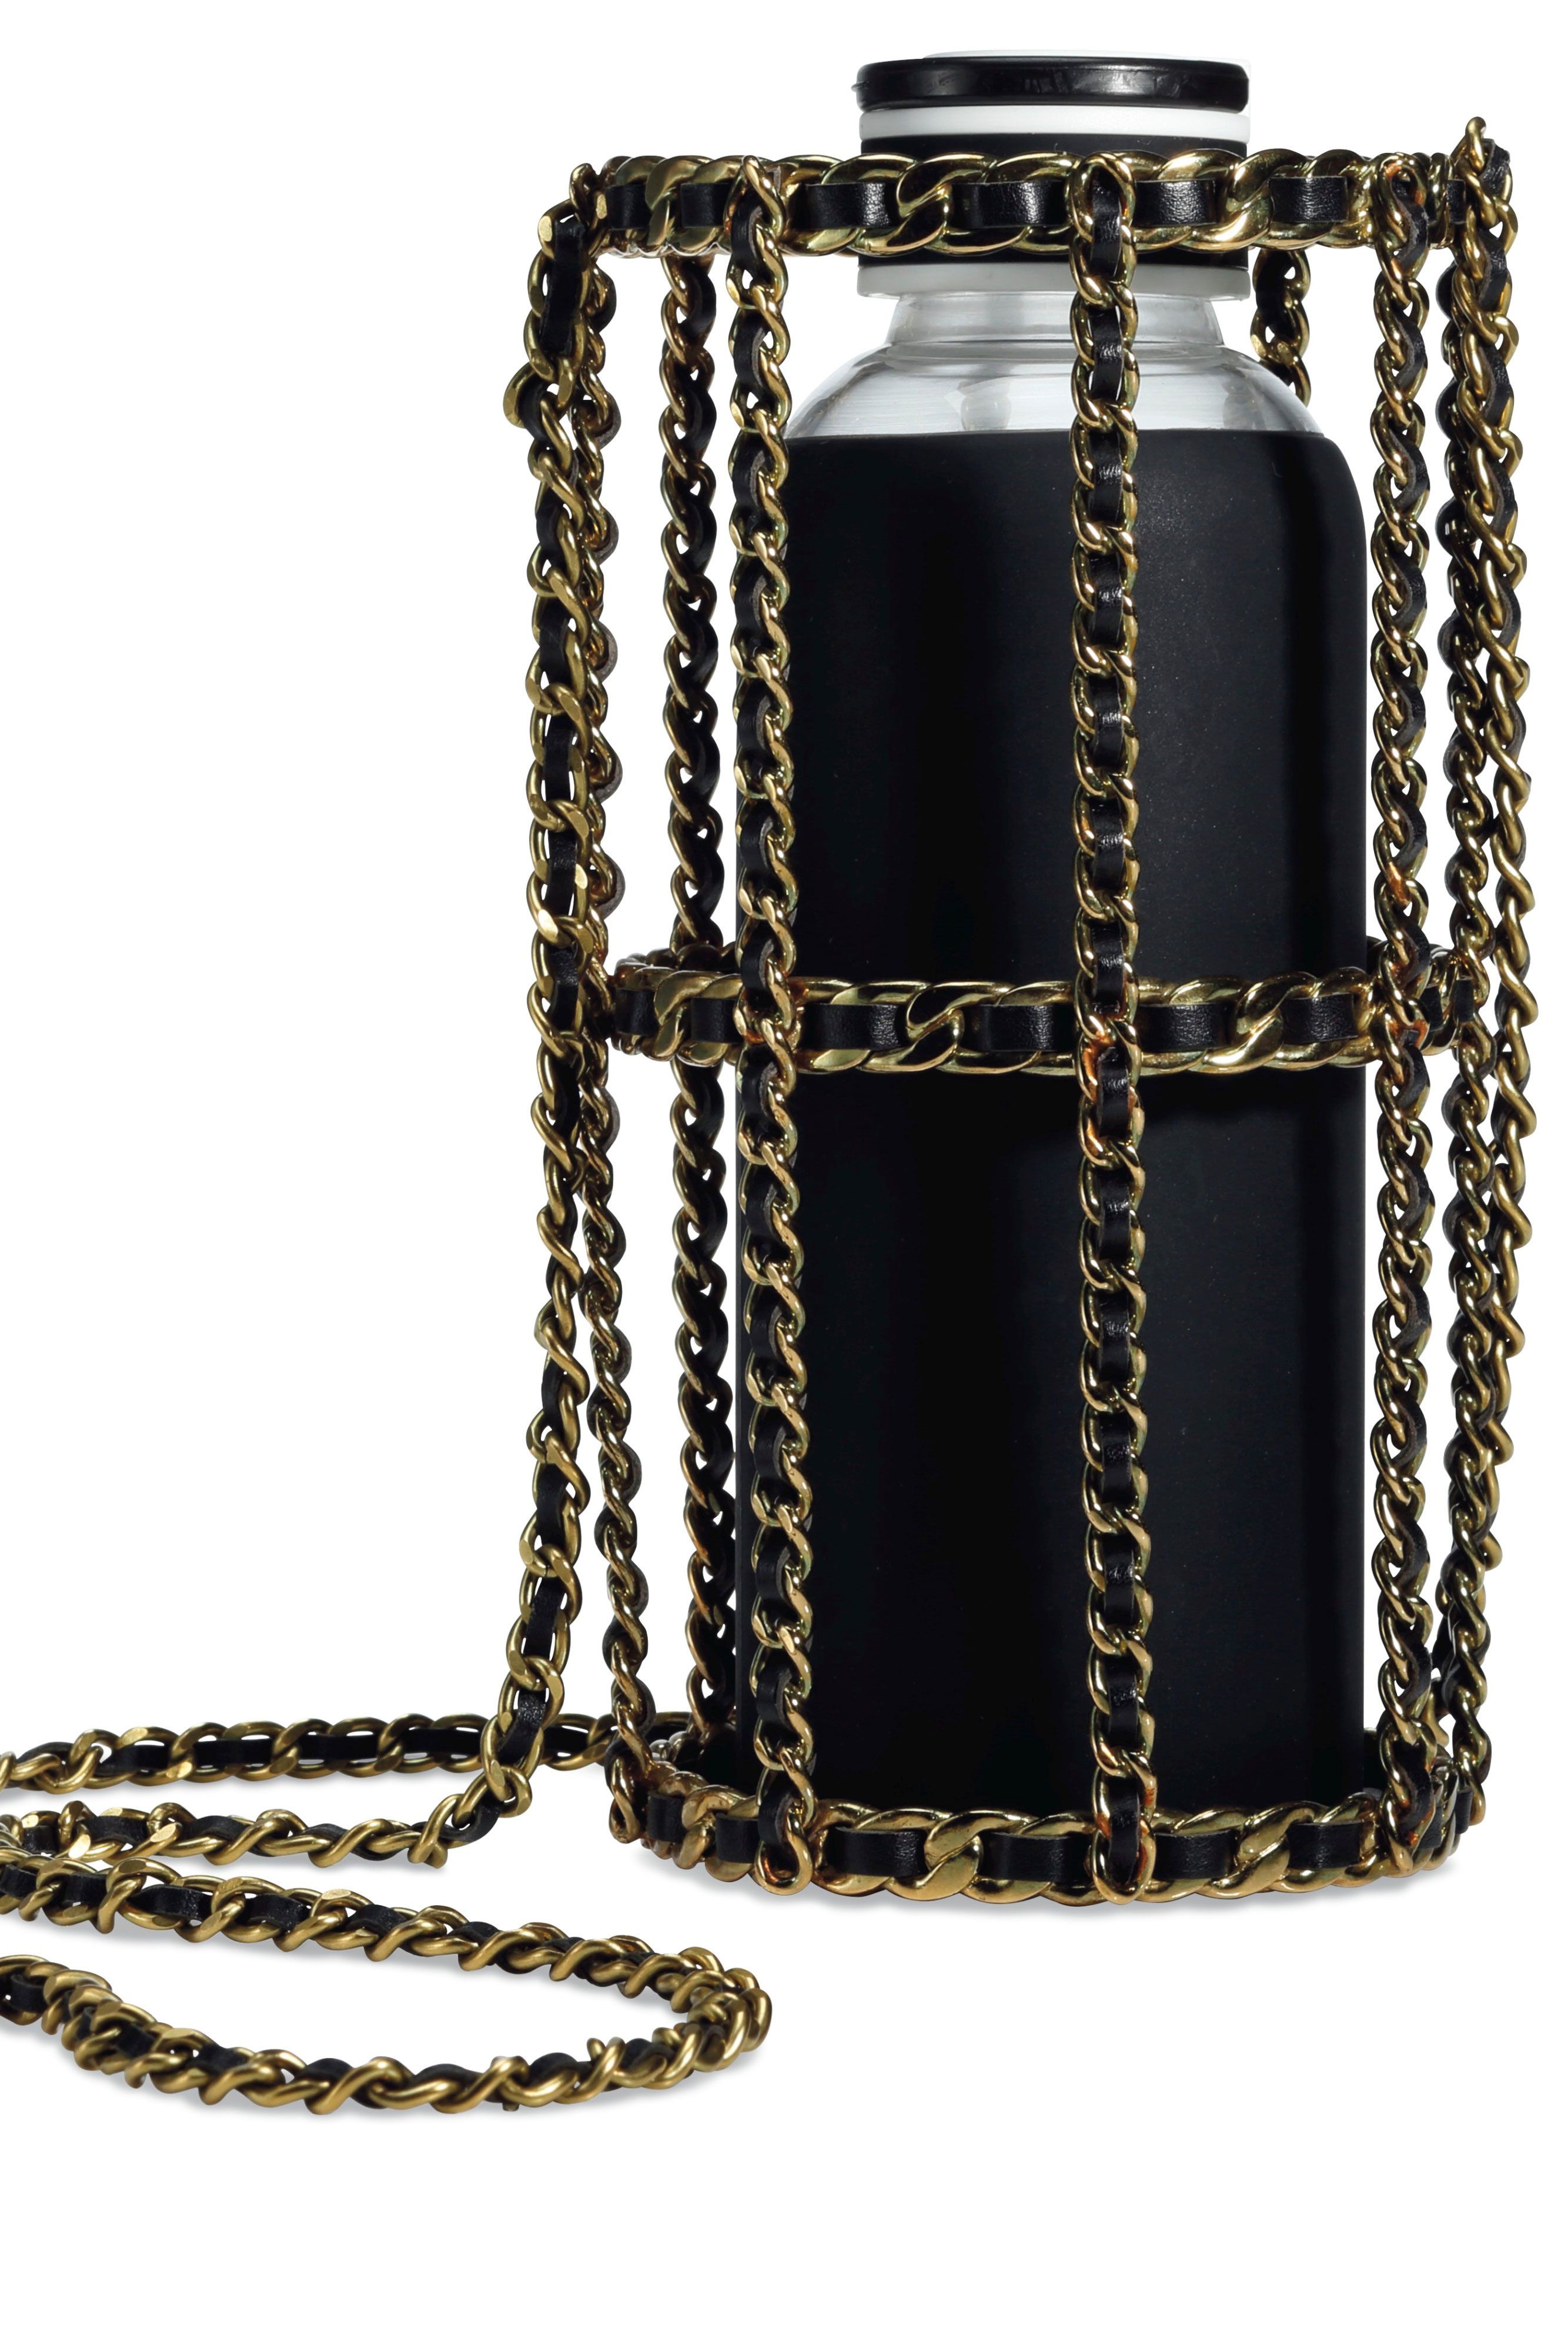 Chanel Black Quilted Lambskin CC Water Bottle Gold Hardware, 2020 Available  For Immediate Sale At Sotheby's